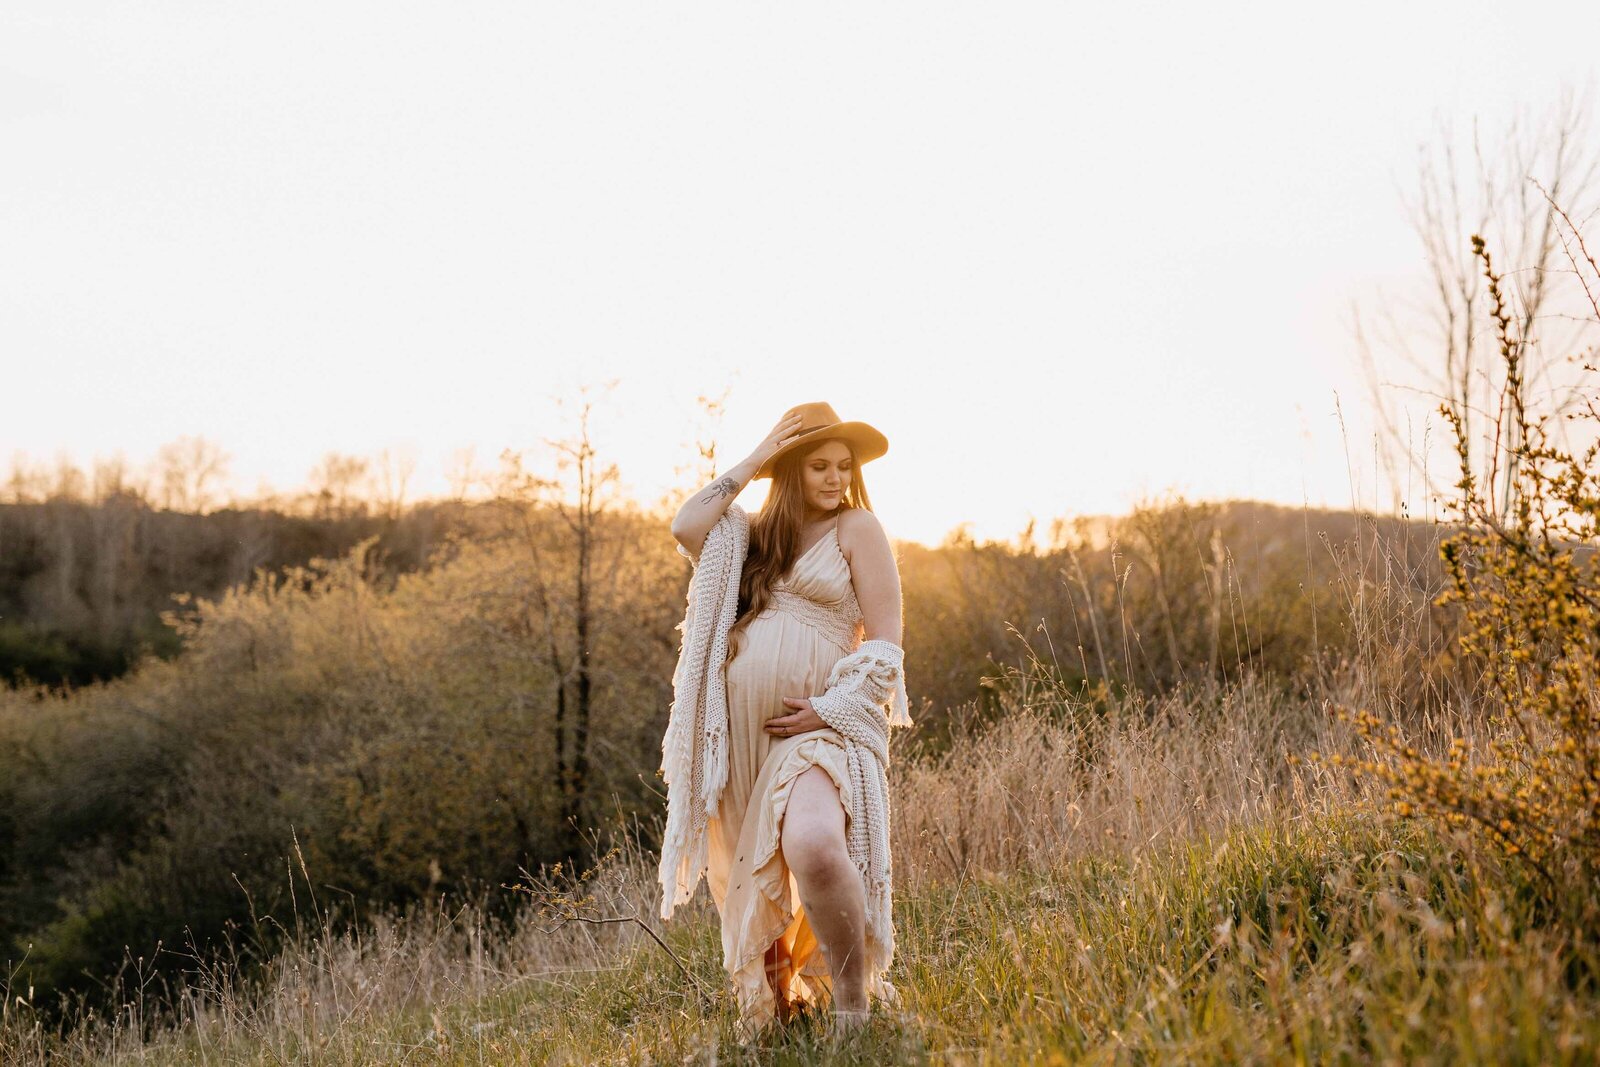 Expectant mom standing for portraits in London, Ontario field with rolling hills in the background. Mom is wearing a long cream dress with her left and under her bump and her right hand adjusting a wide-brimmed felt hat. Shot at golden hour with warm light.